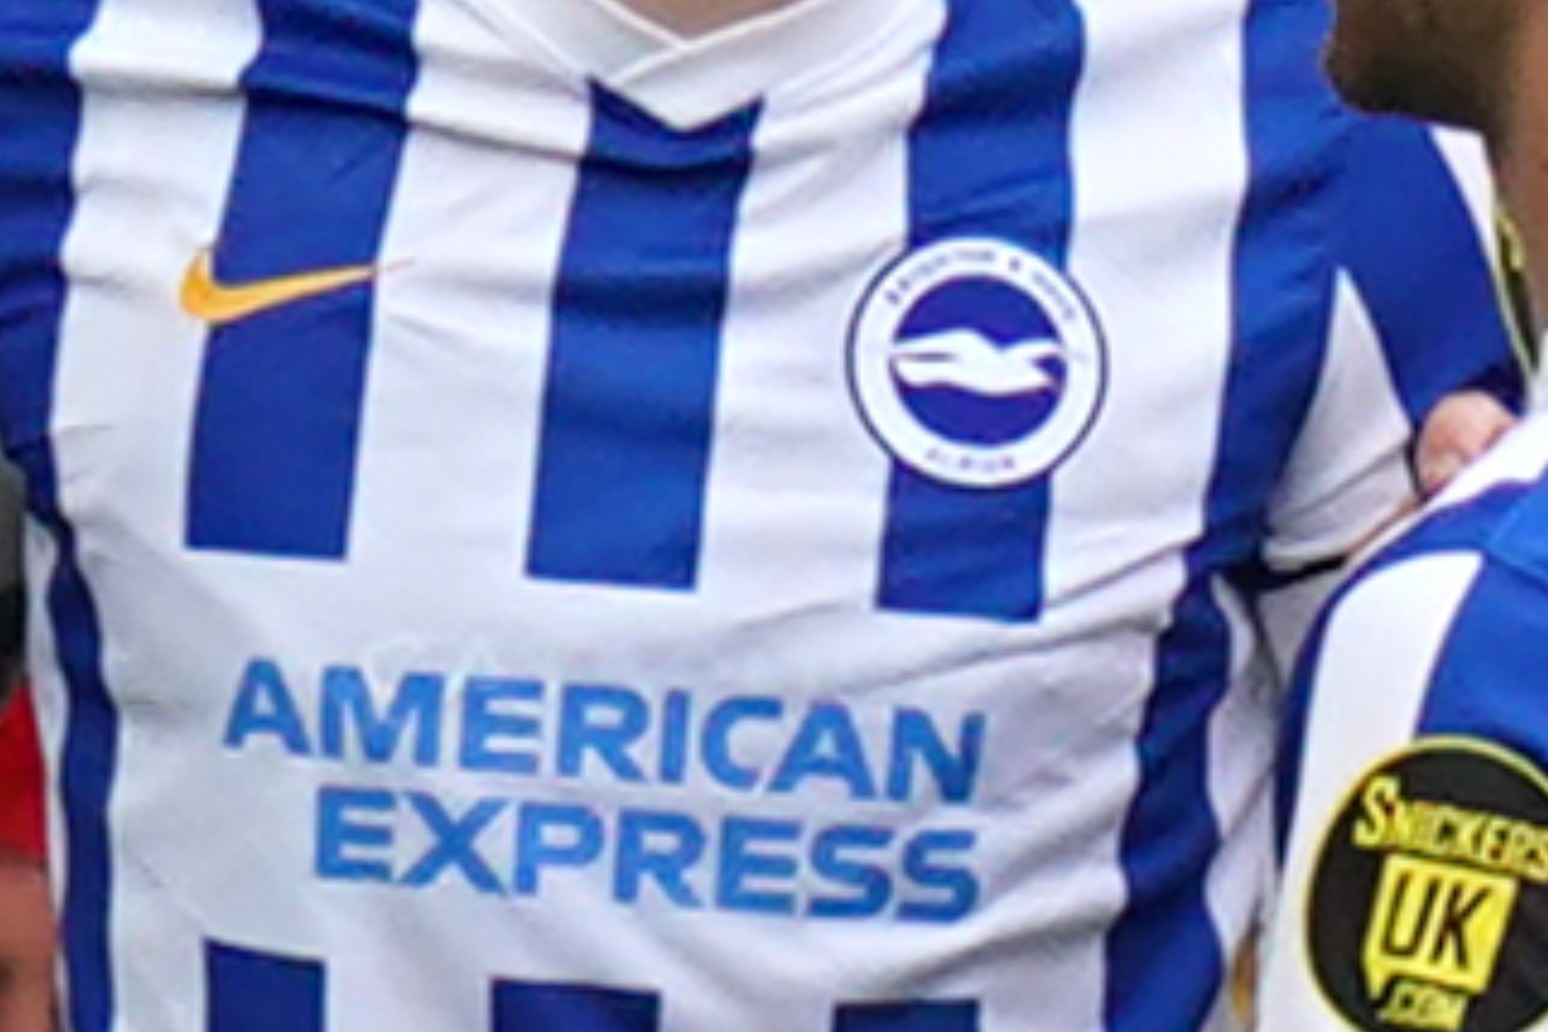 ‘I bleed blue and white’ – Brighton fan ready for FA Disability Cup final 